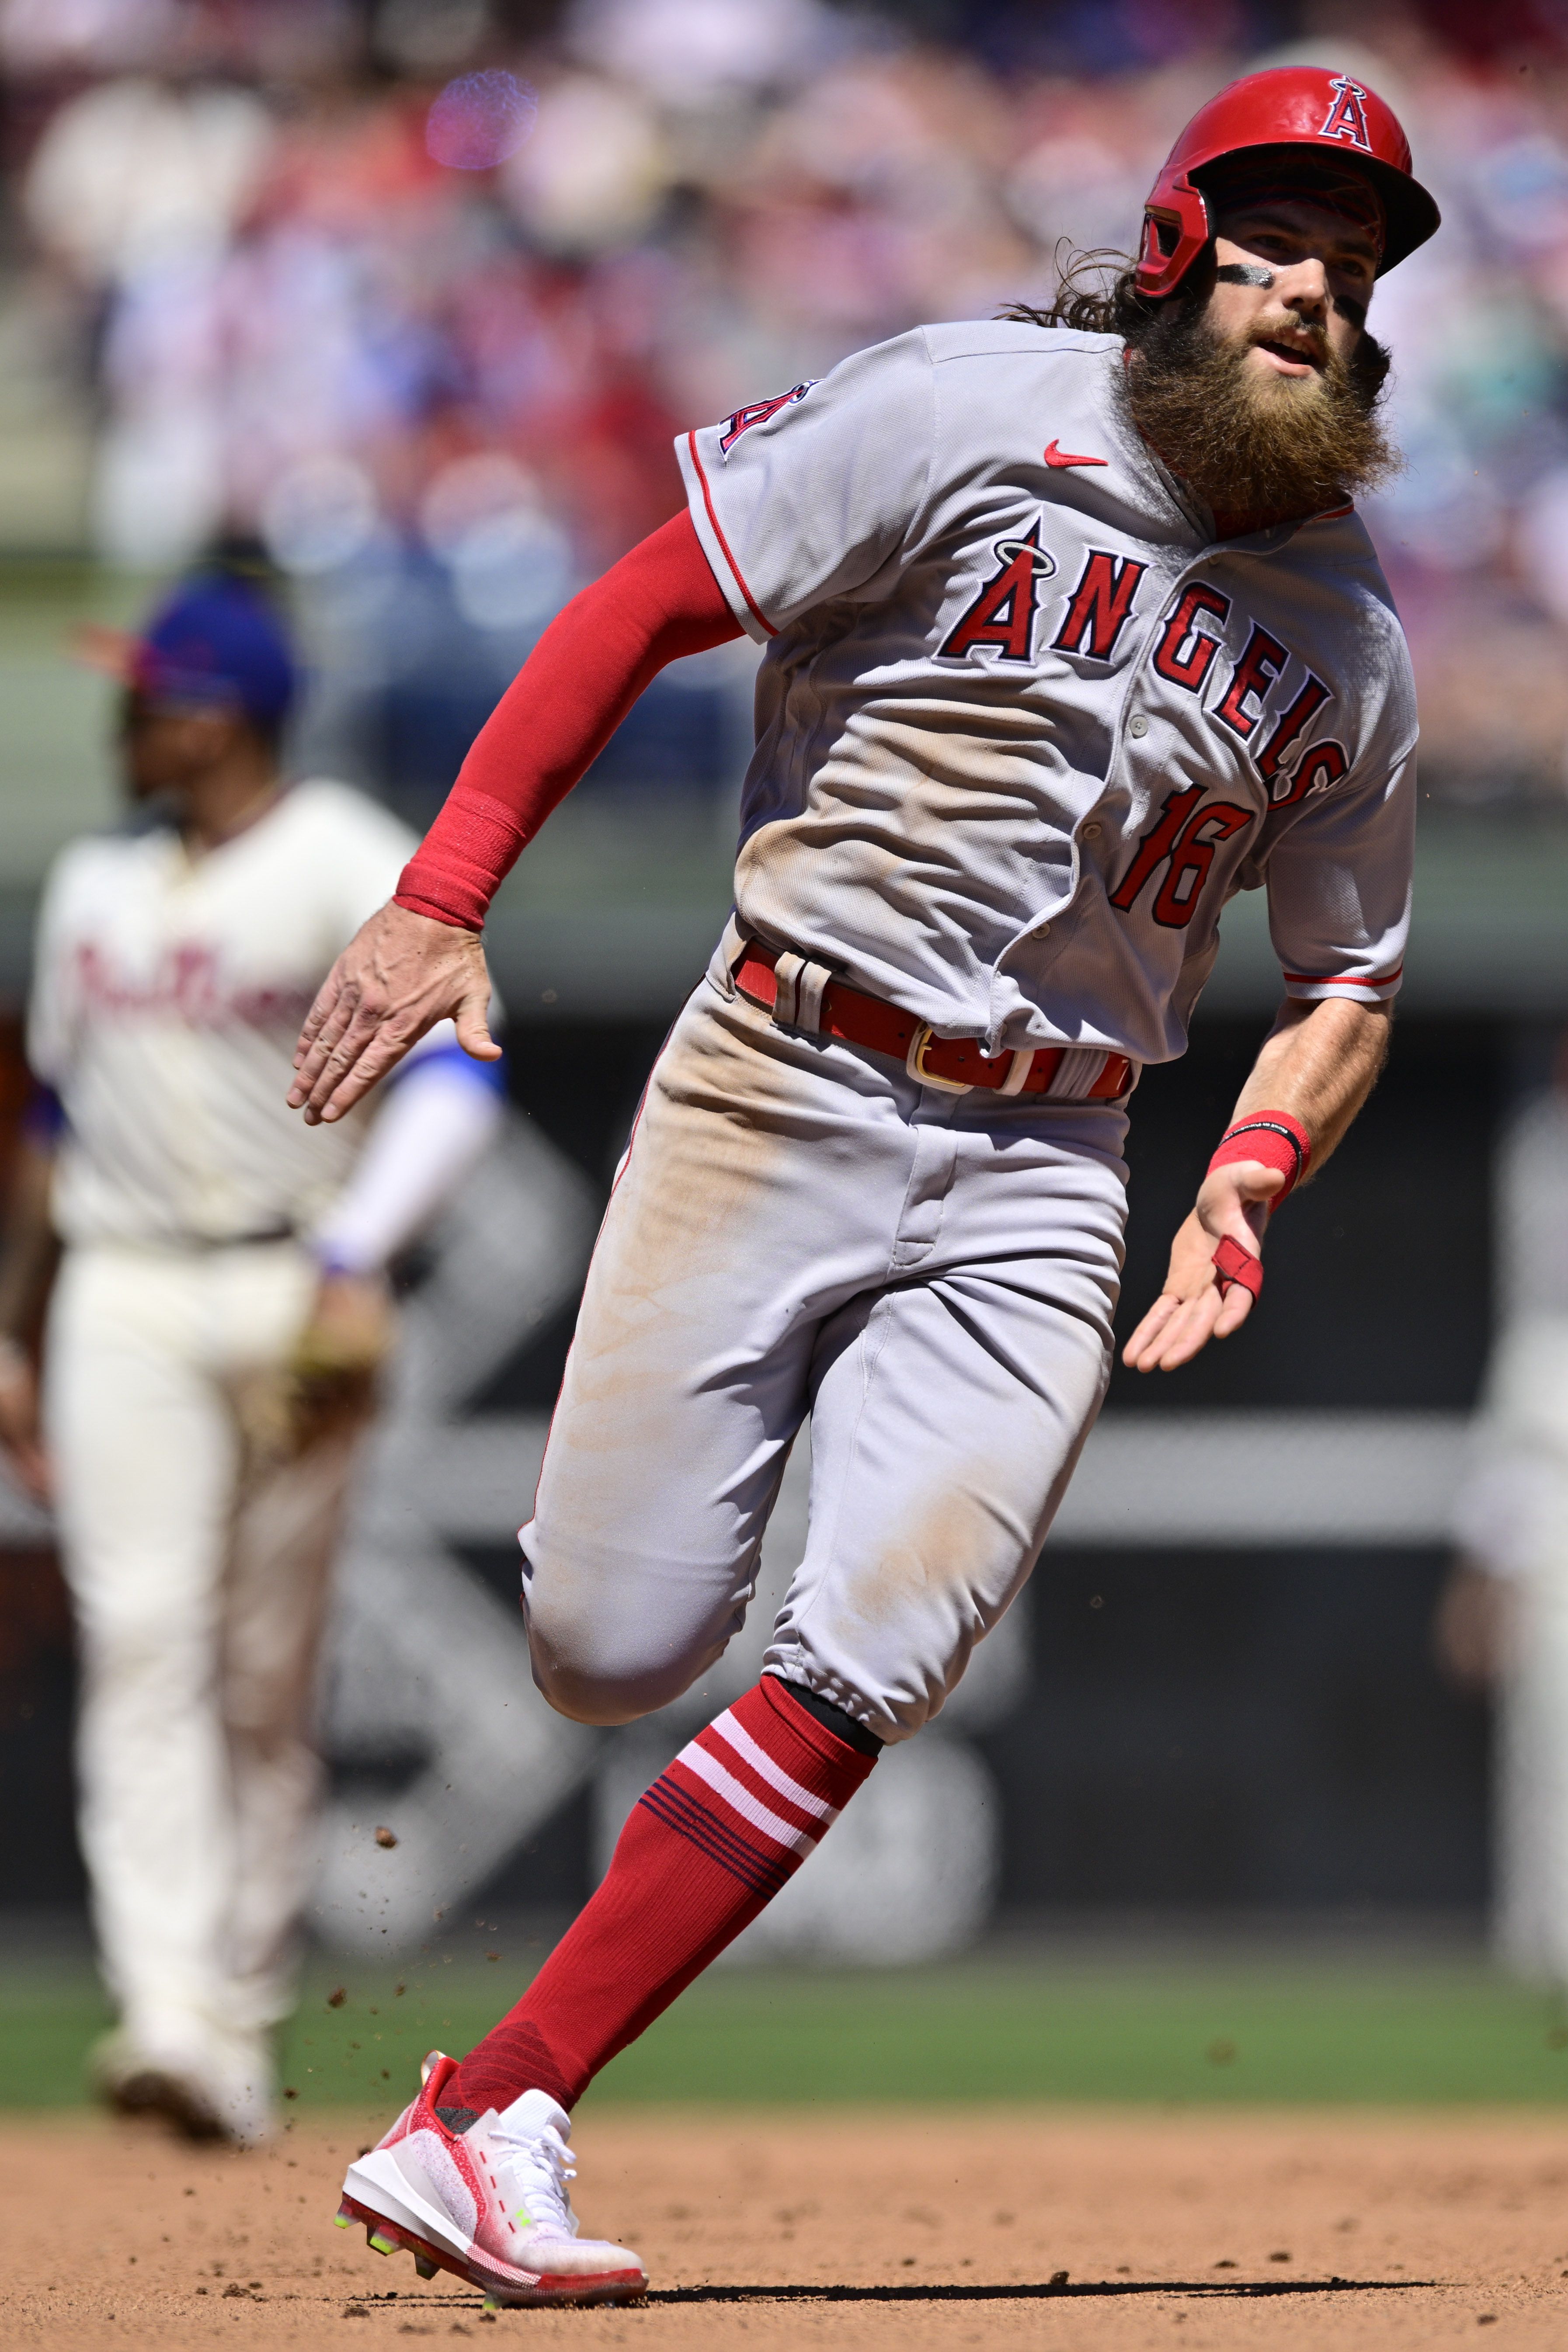 Phillies rally late to hand Angels 11th straight loss